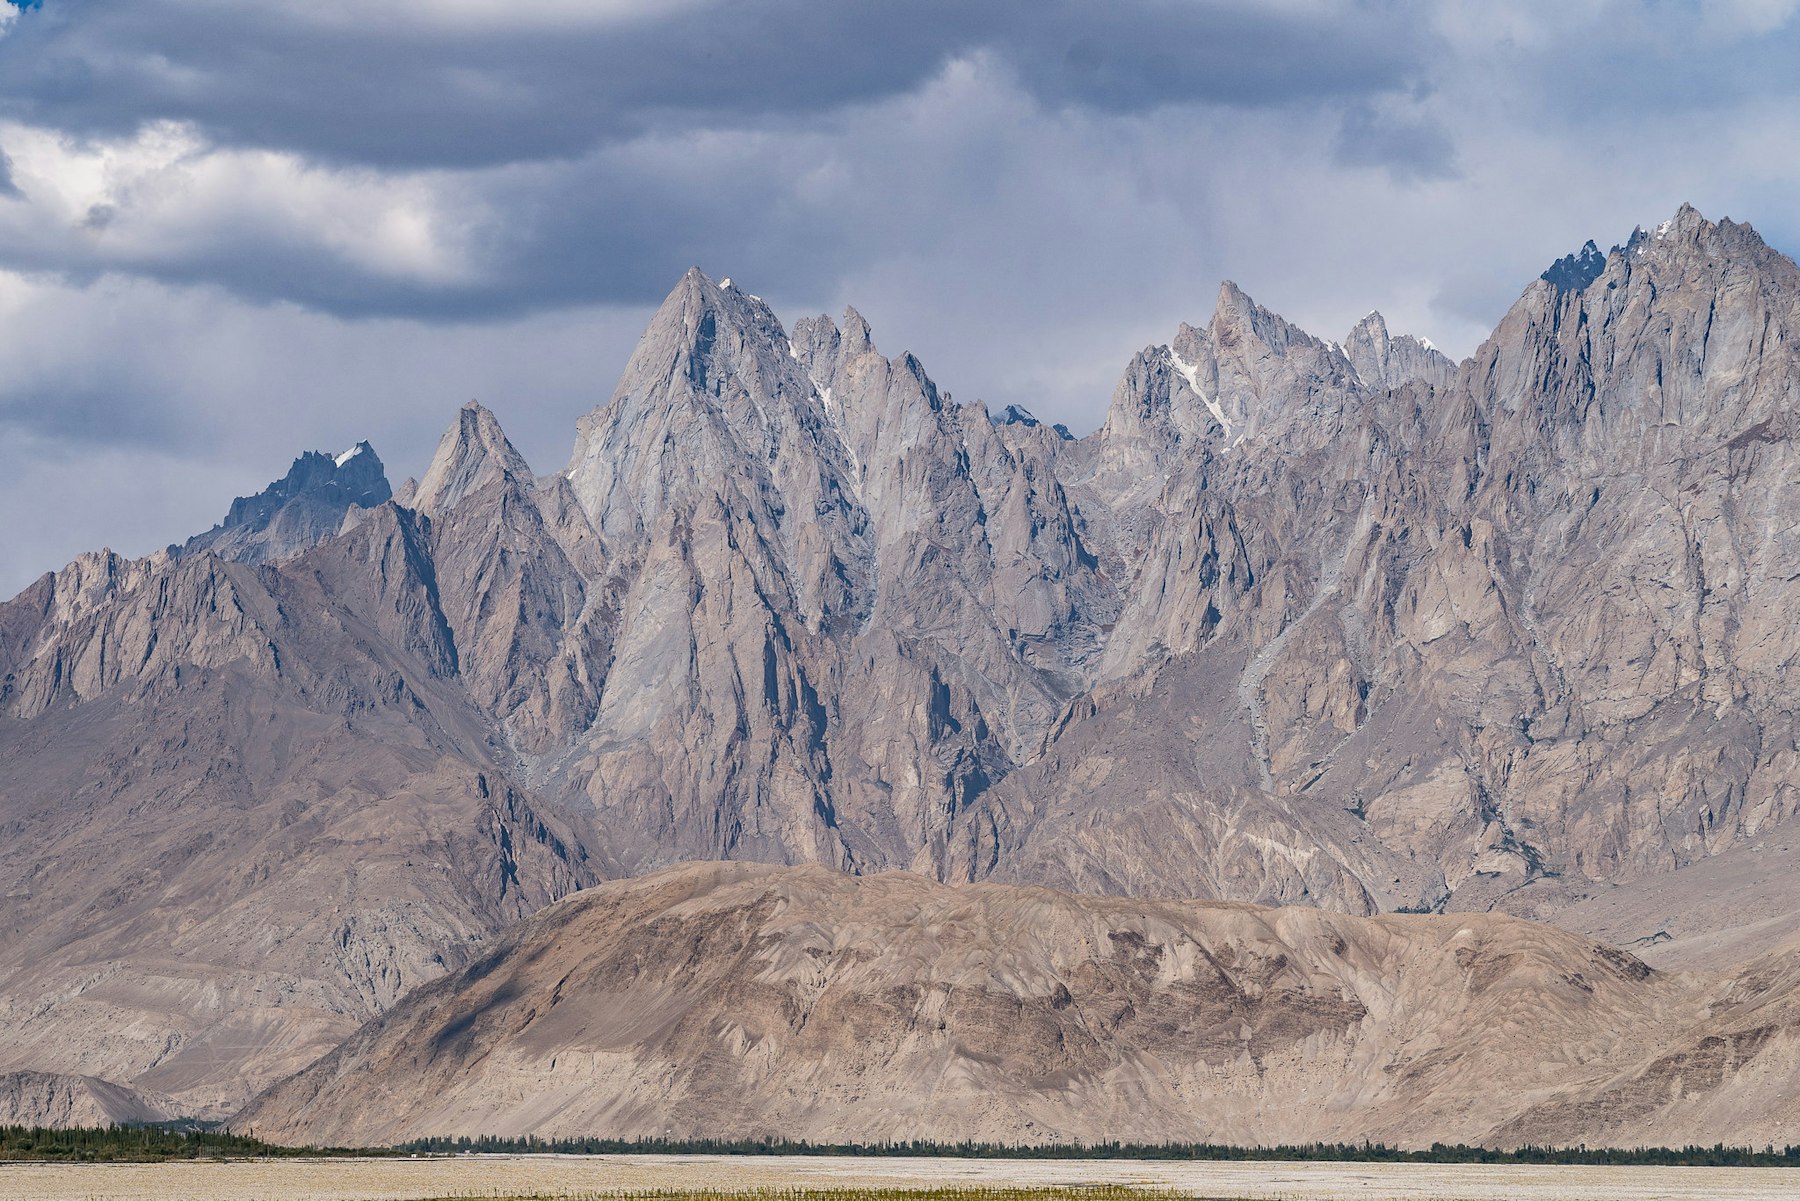 Northern Pakistan is sometimes referred to as a vertical desert due to how dry it is.